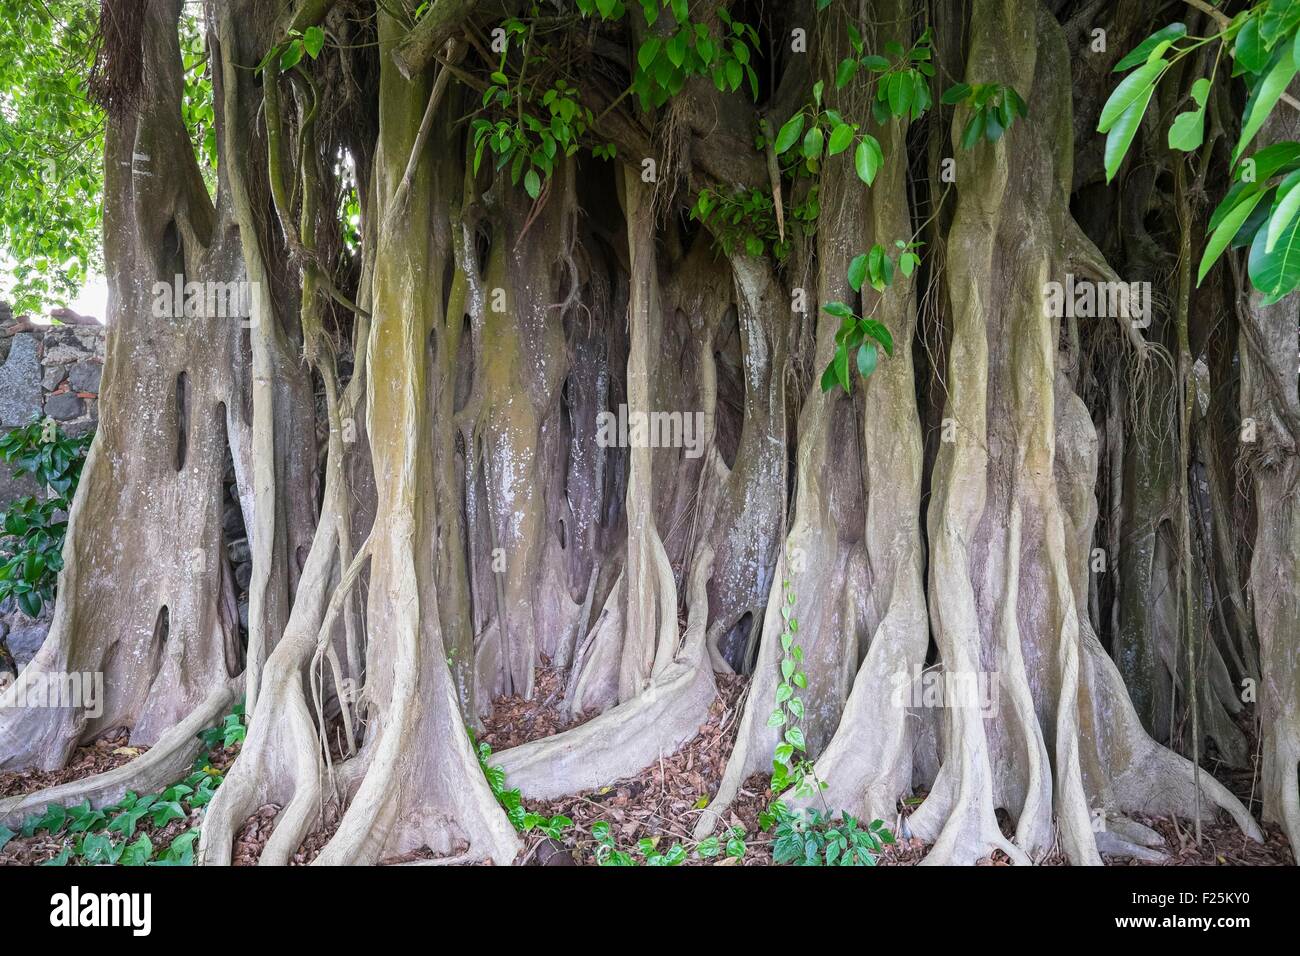 France, Martinique, Basse Pointe, Strangler figtree Stock Photo